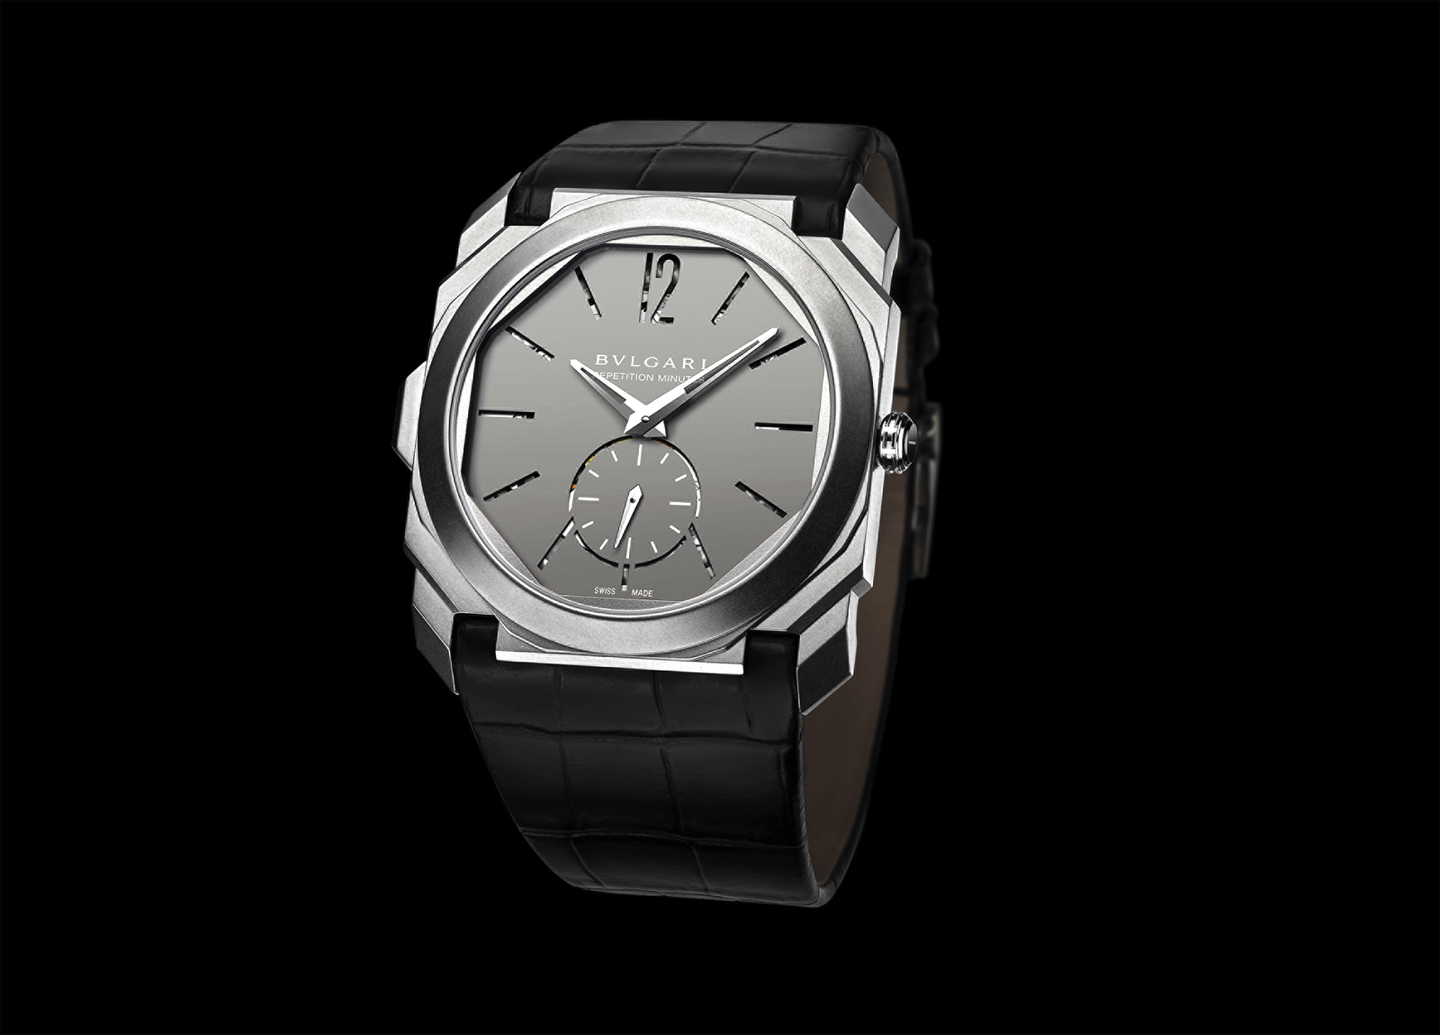 Introducing the record-setting Octo Finissimo Minute Repeater to You